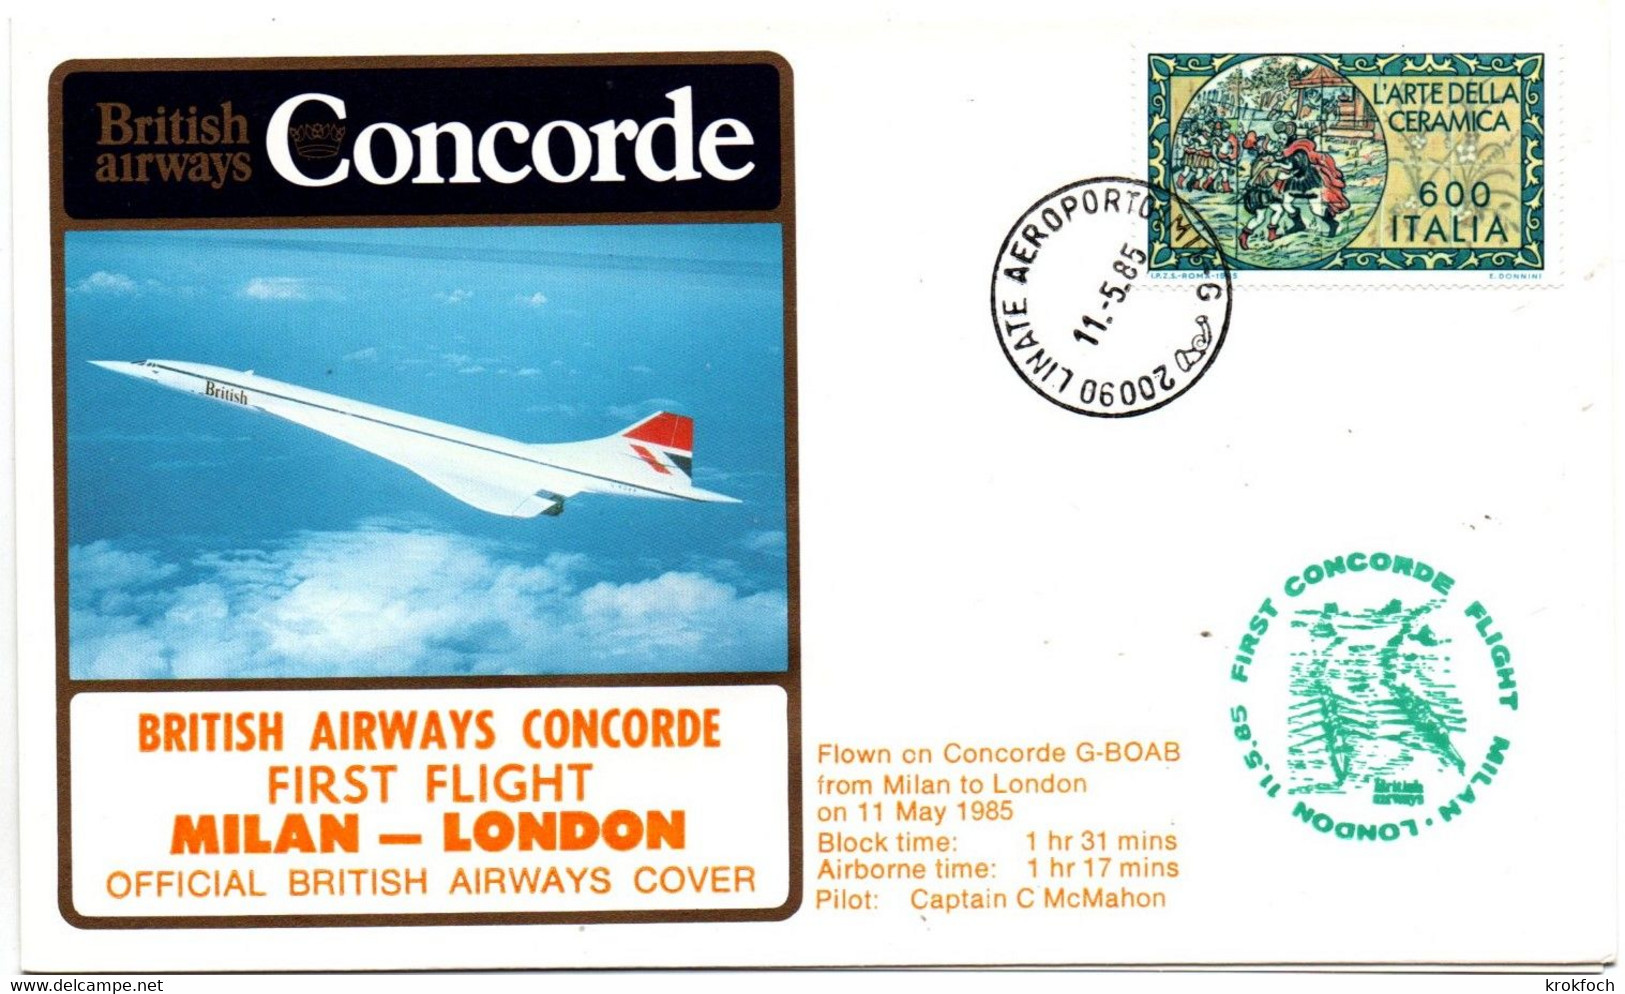 Illustrated cover ITA 1985 with cachet First Concorde flight Milan London by British Airways